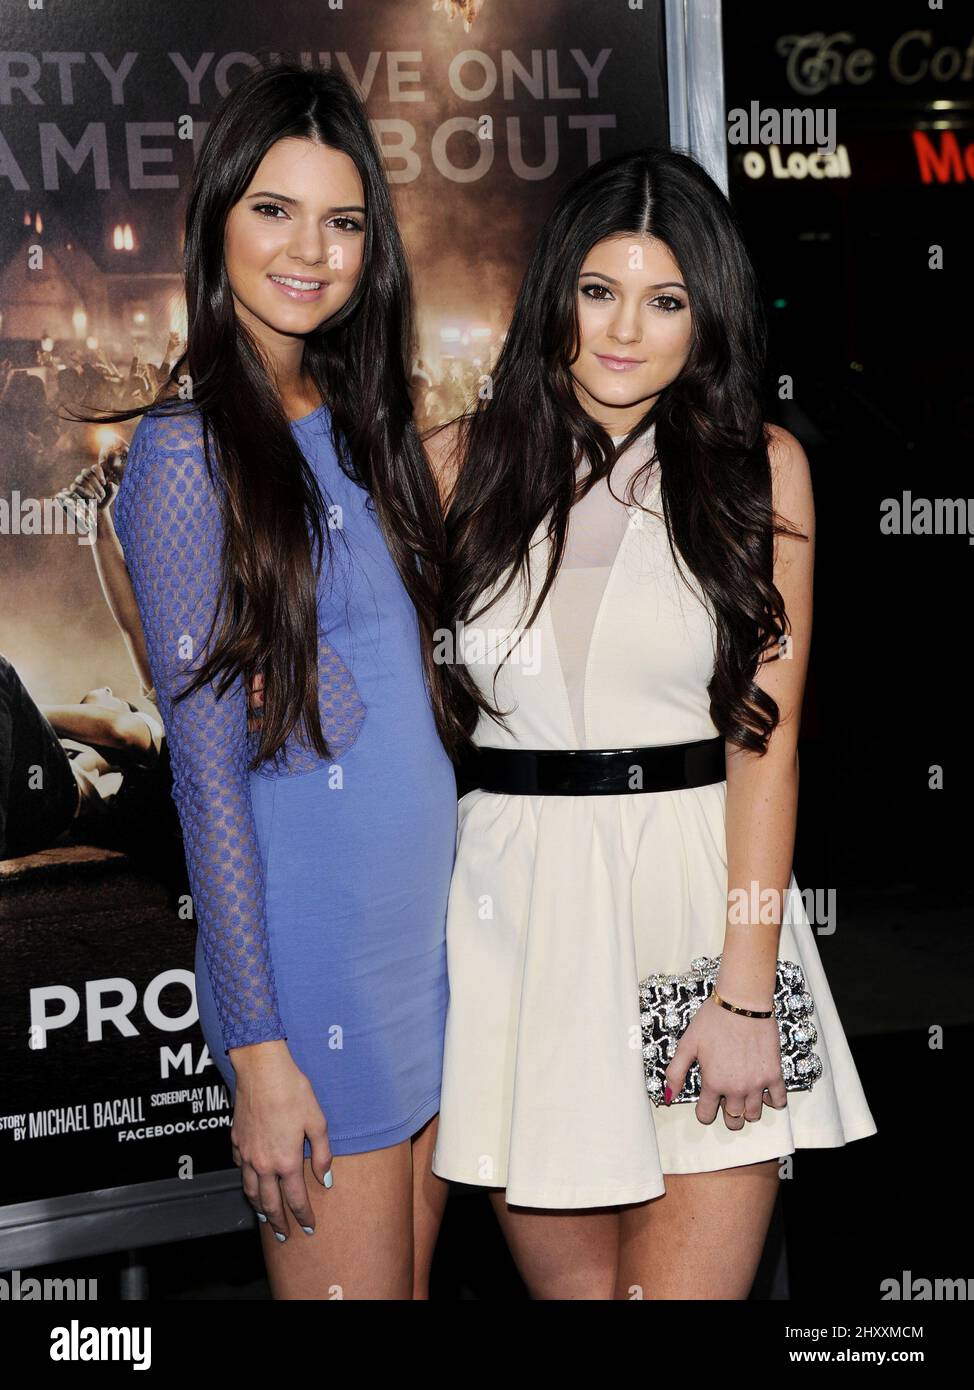 Kendall Jenner and Kylie Jenner attending the 